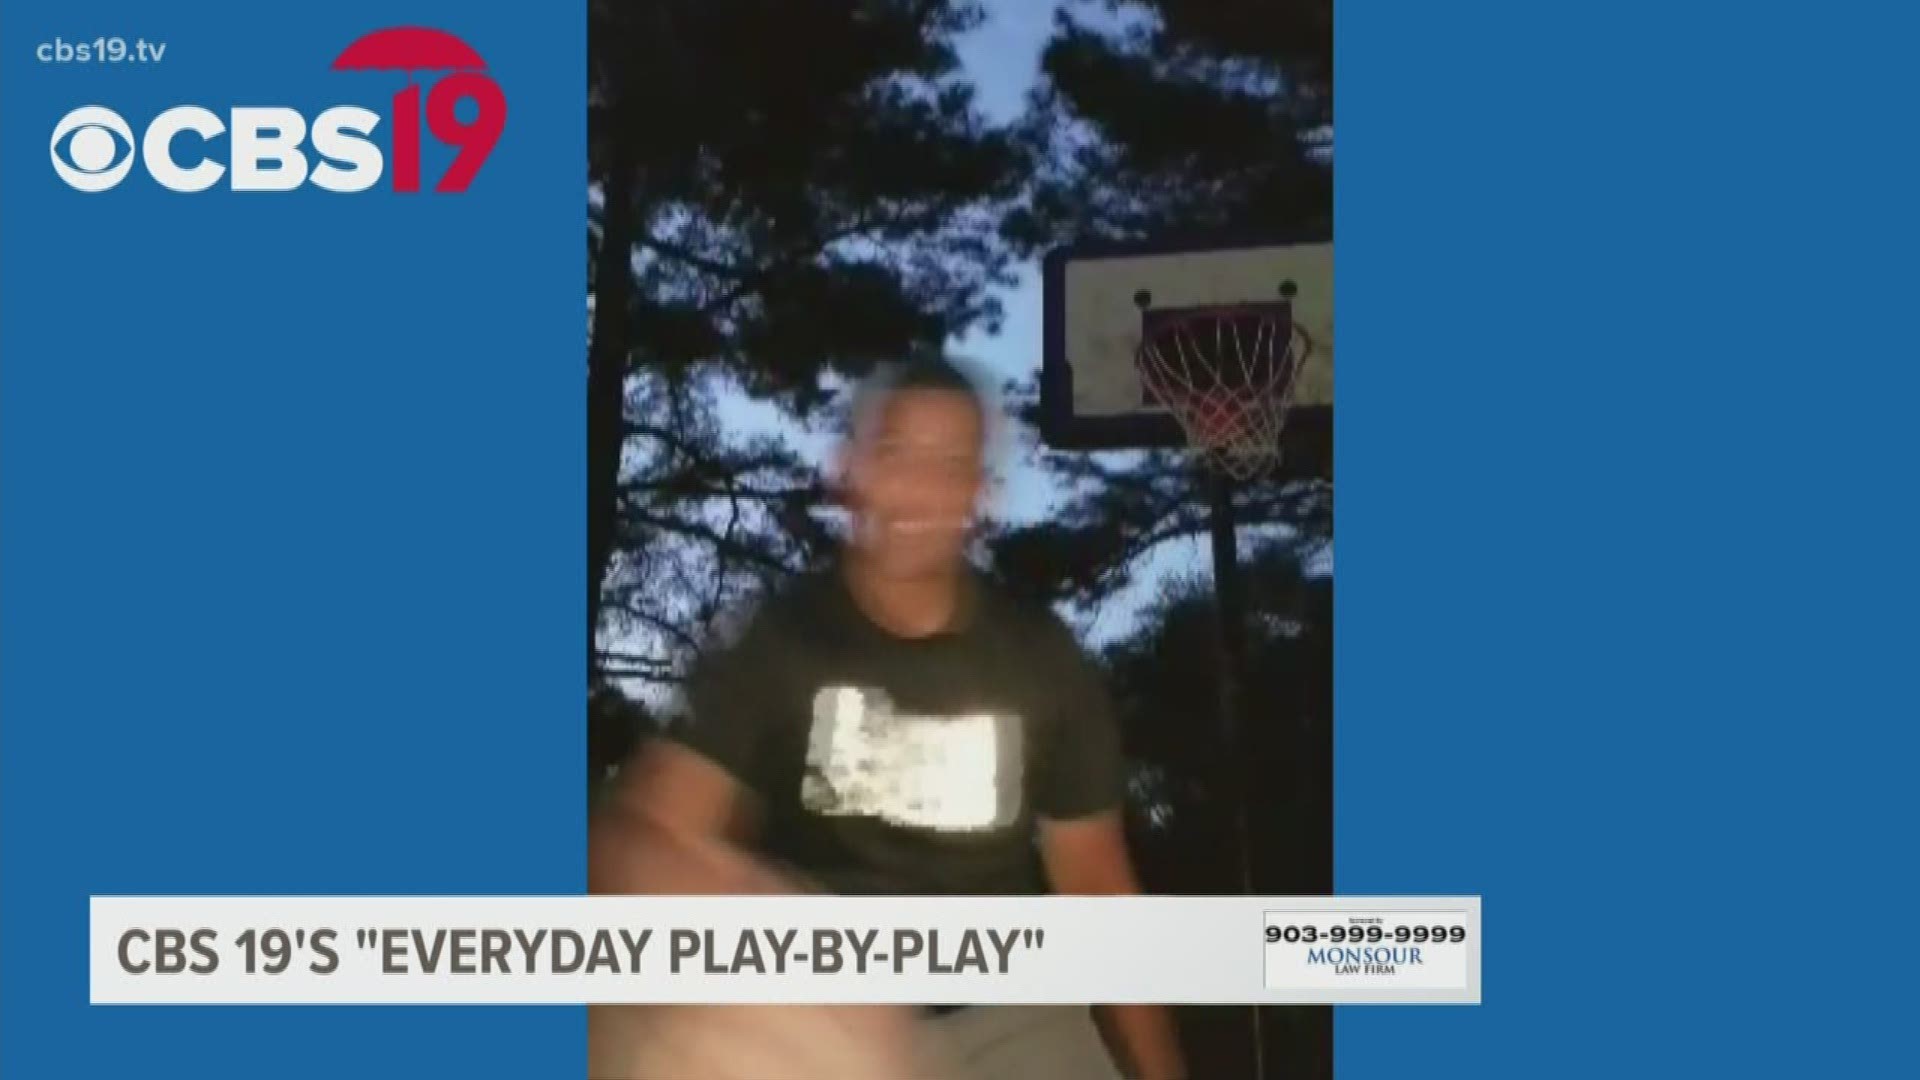 It's Friday so that means it's time for another installment of CBS 19's "Everyday Play-By-Play"